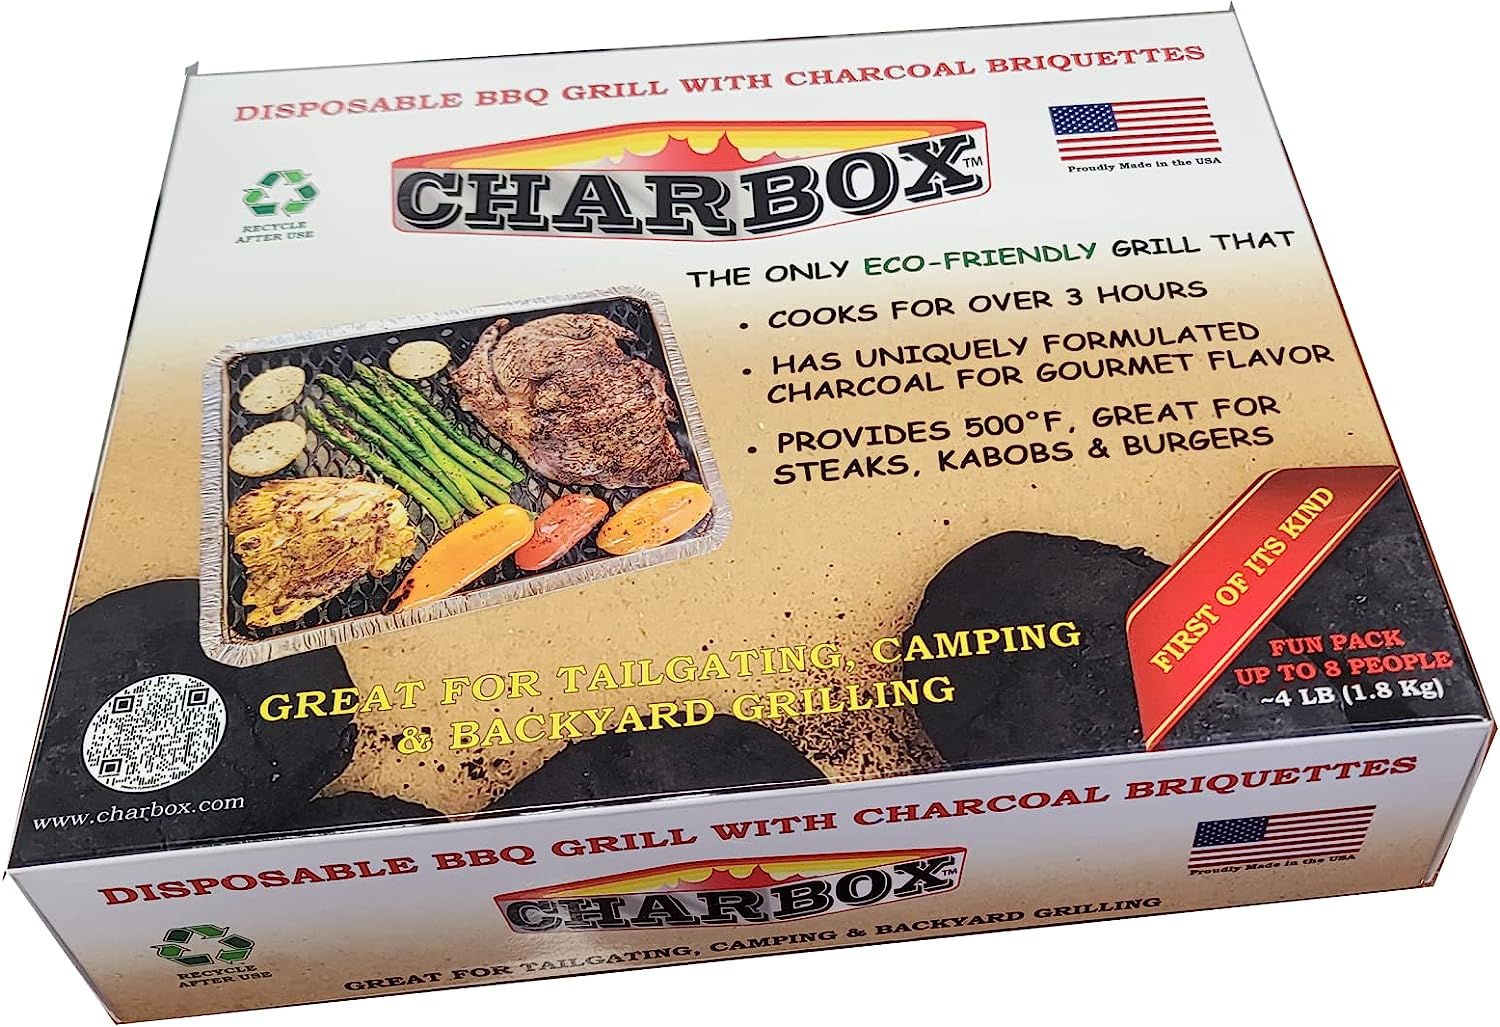 CHARBOX, Fun Pack (1-4 People) Disposable BBQ Charcoal [...]